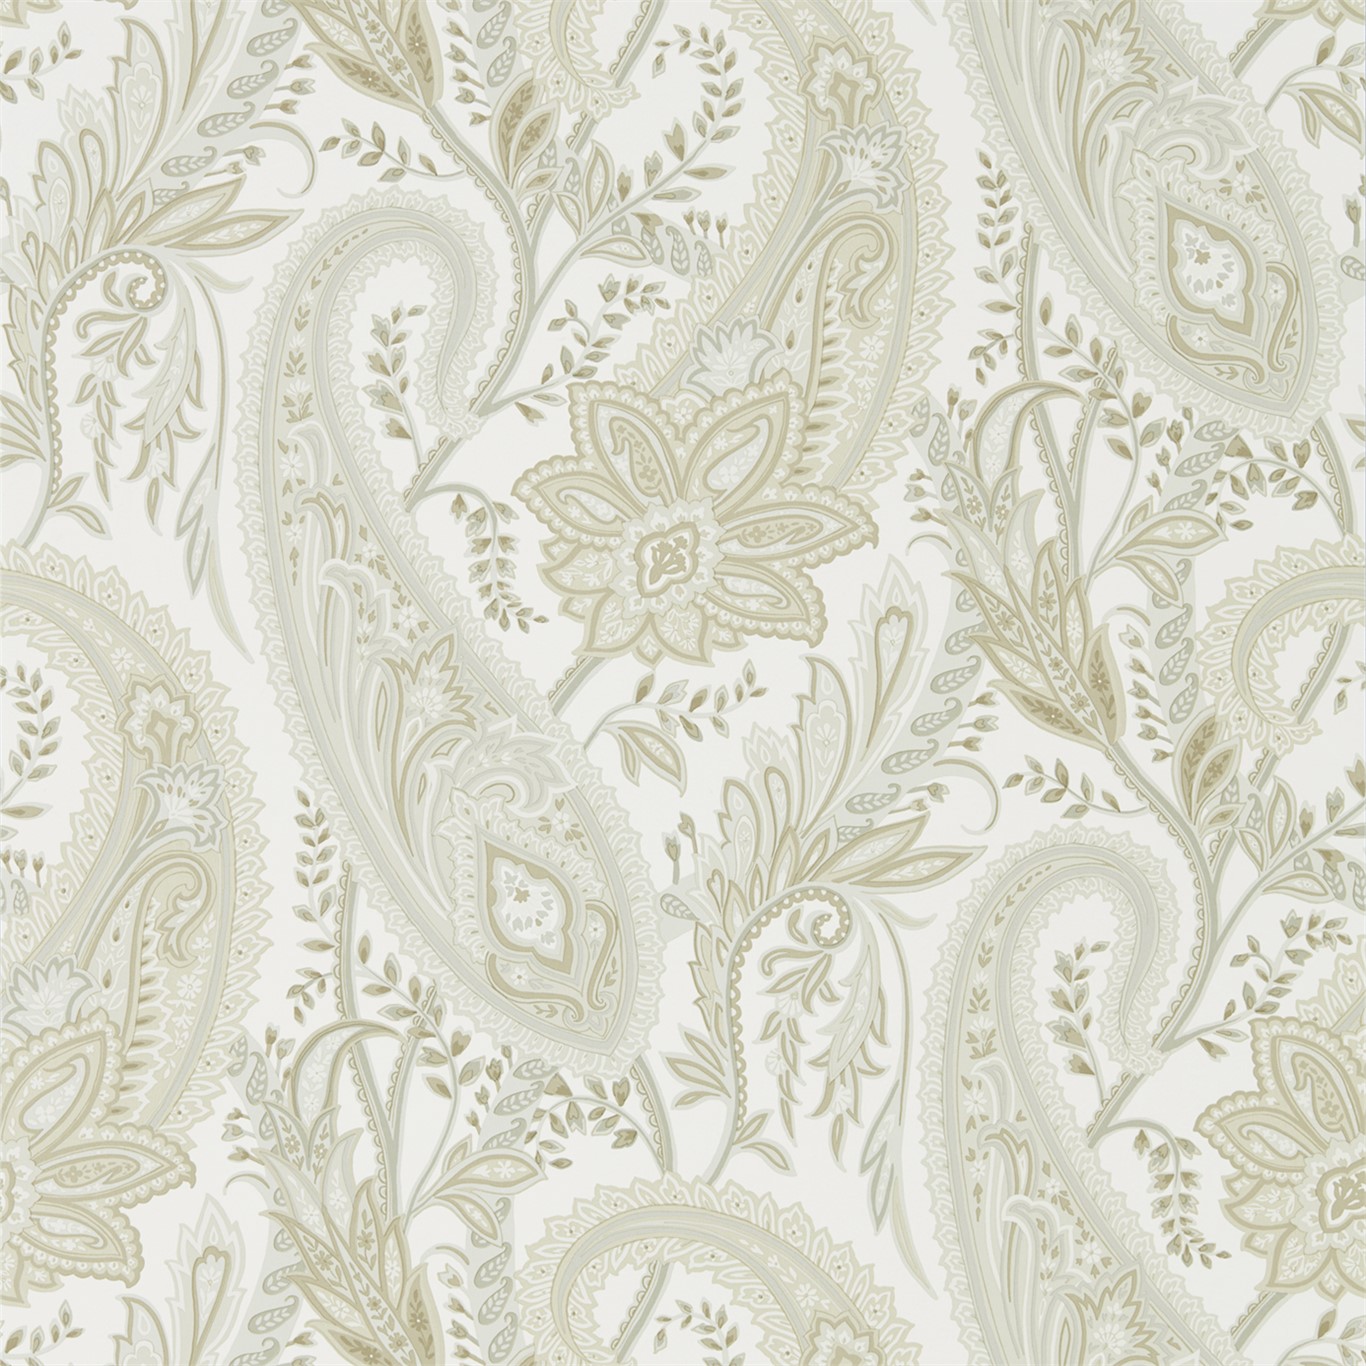 Wallpaper - Sanderson Art of the Garden Cashmere Paisley Mineral/Taupe